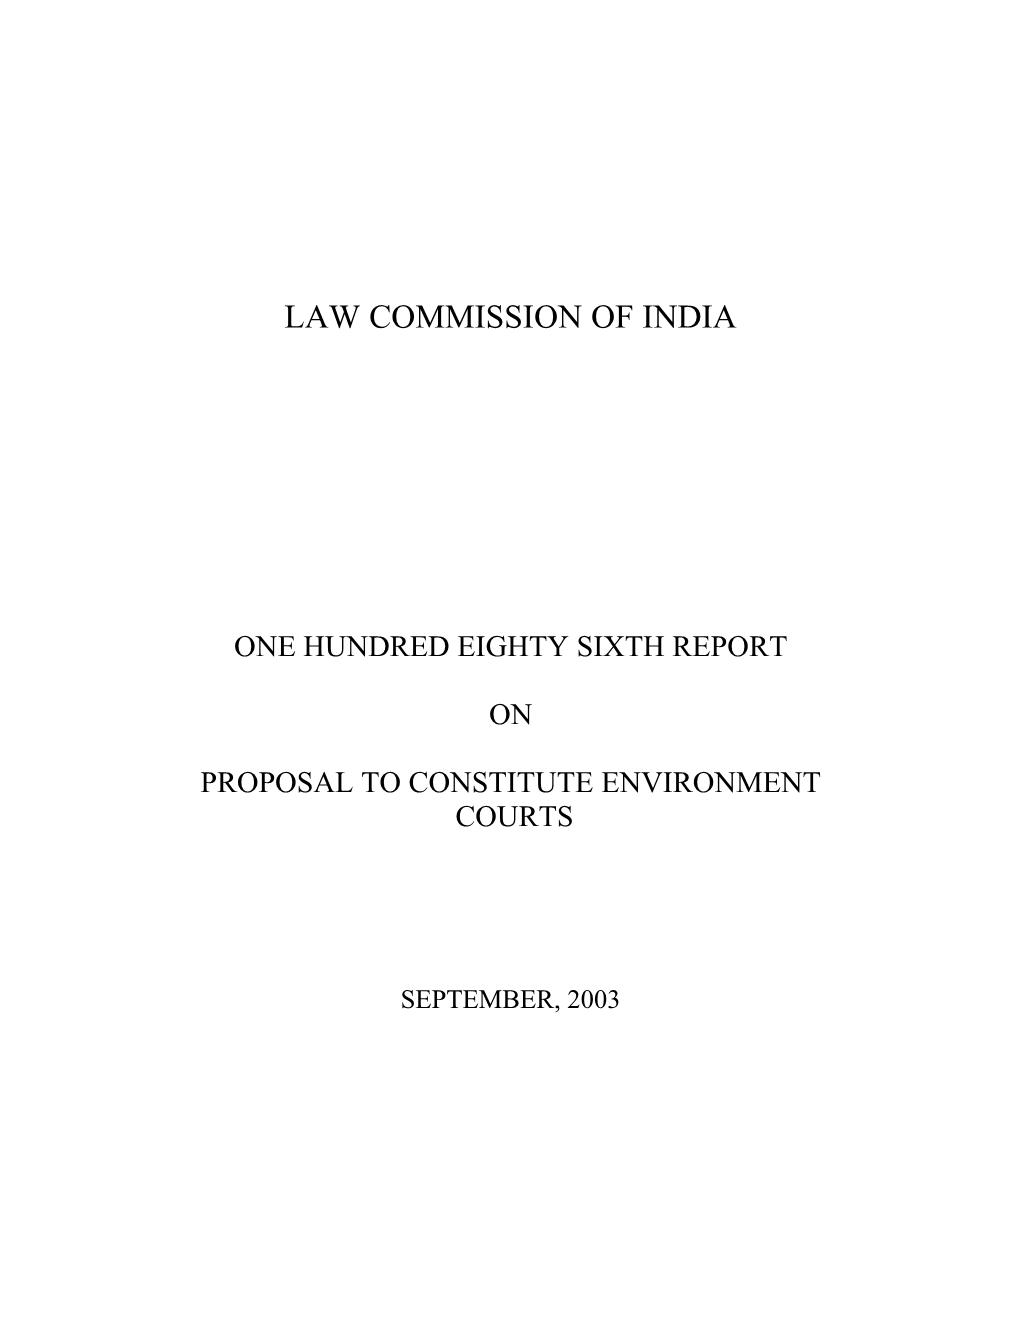 186Th Report of the Law Commission on ‘Proposal to Constitute Environment Courts’